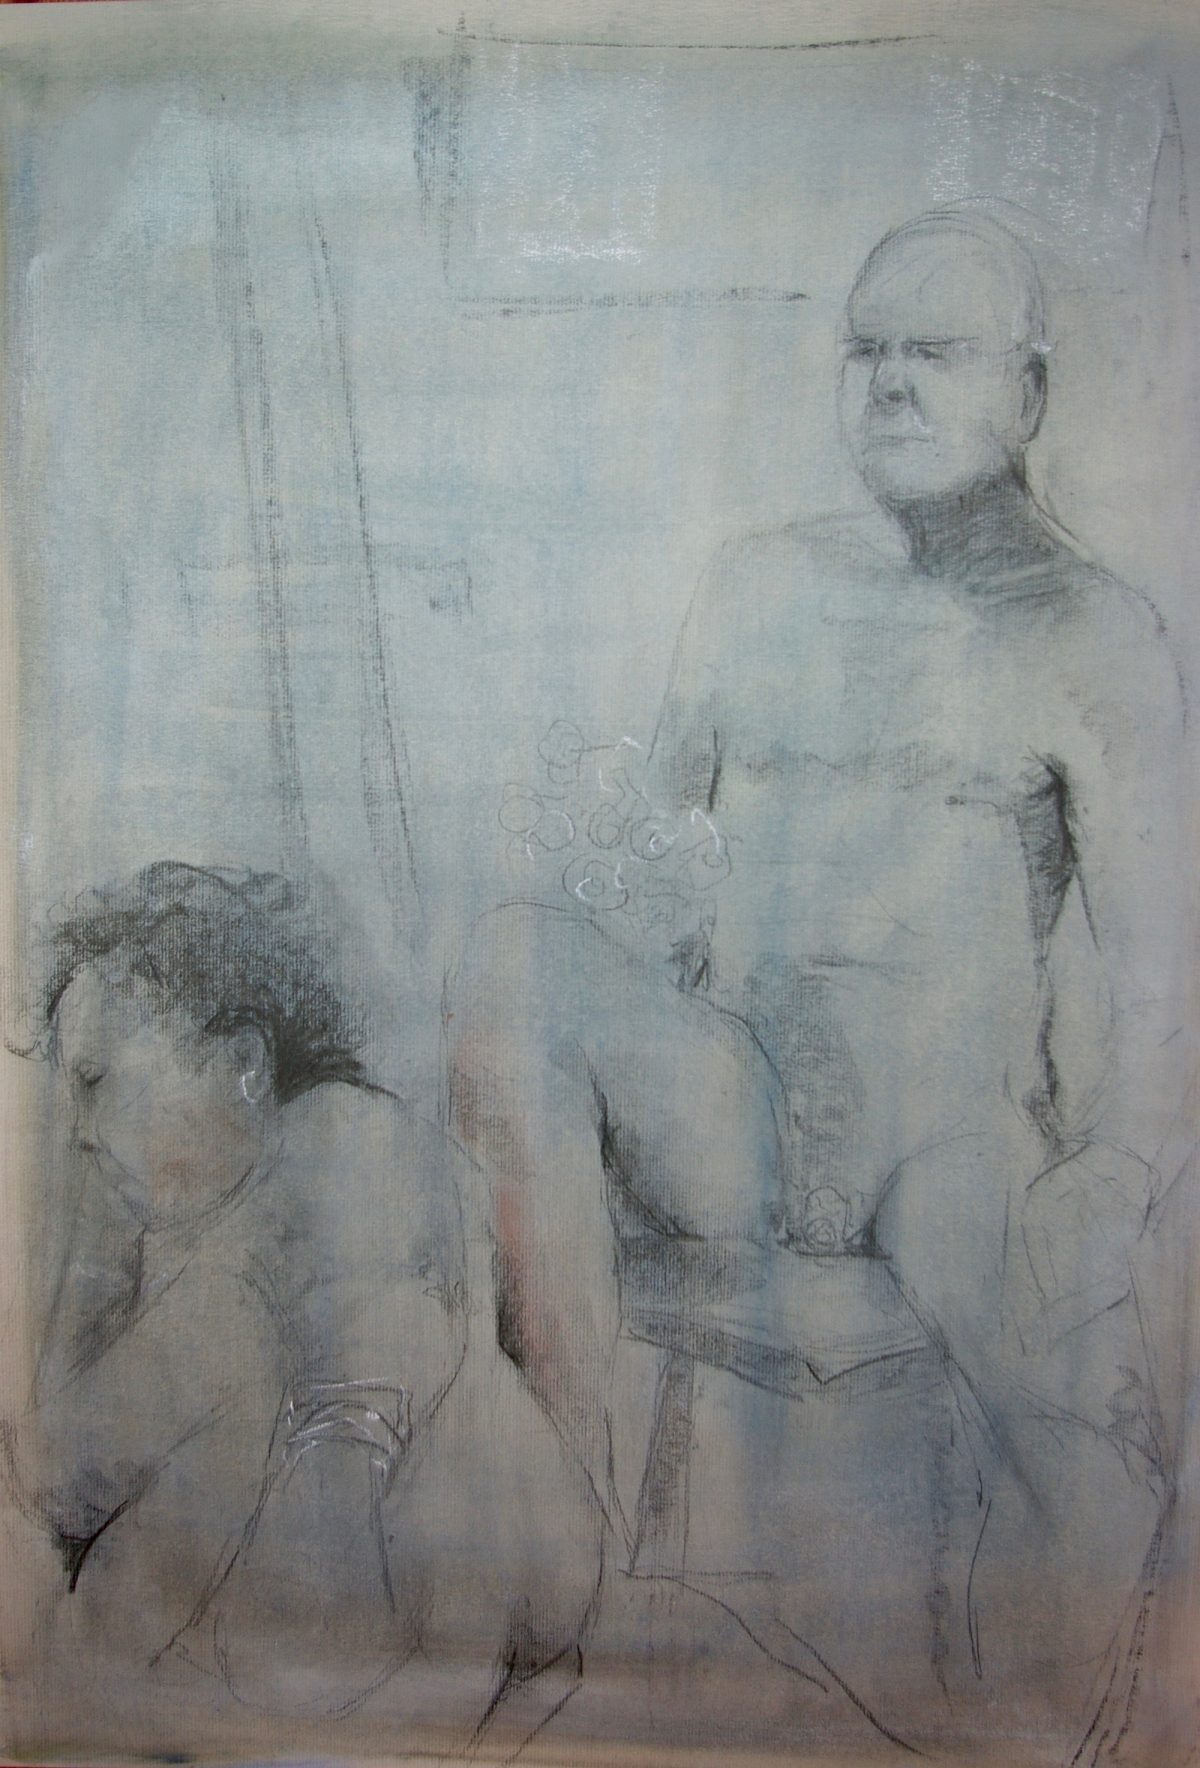 Narrative Nudes. Charcoal on Oil Ground. Life Drawings